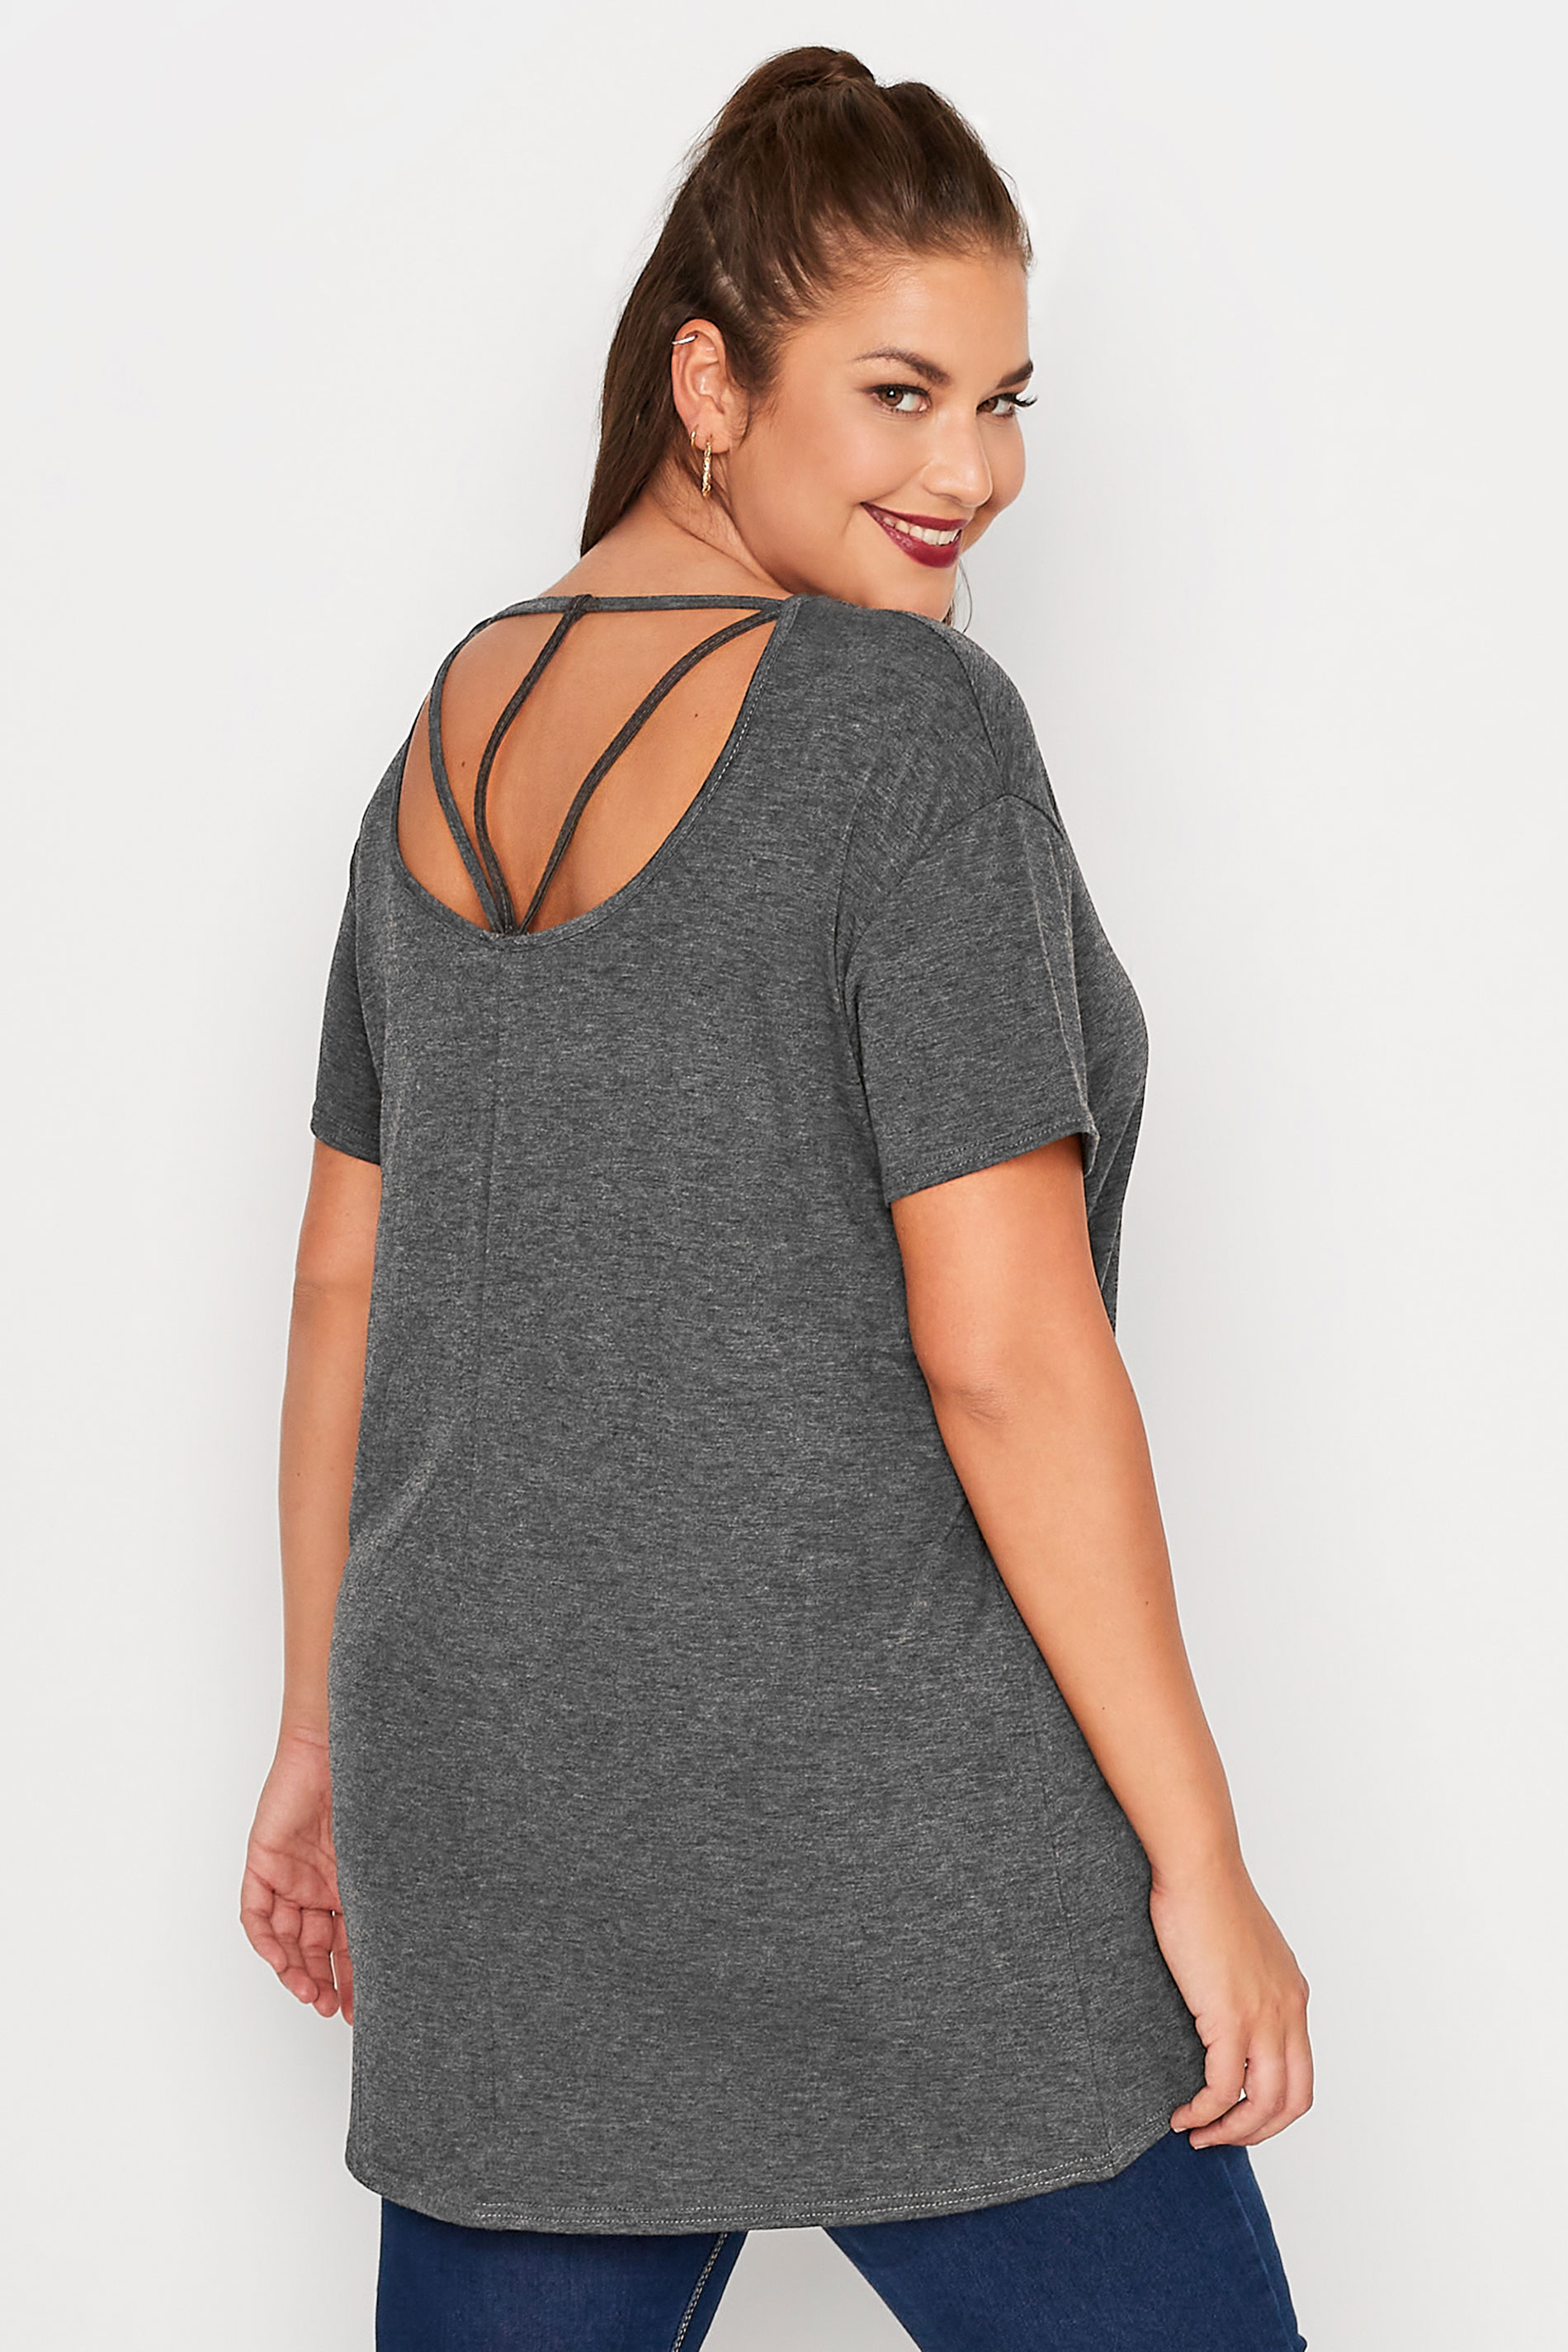 LIMITED COLLECTION Curve Grey Cut Out Back T-Shirt 1